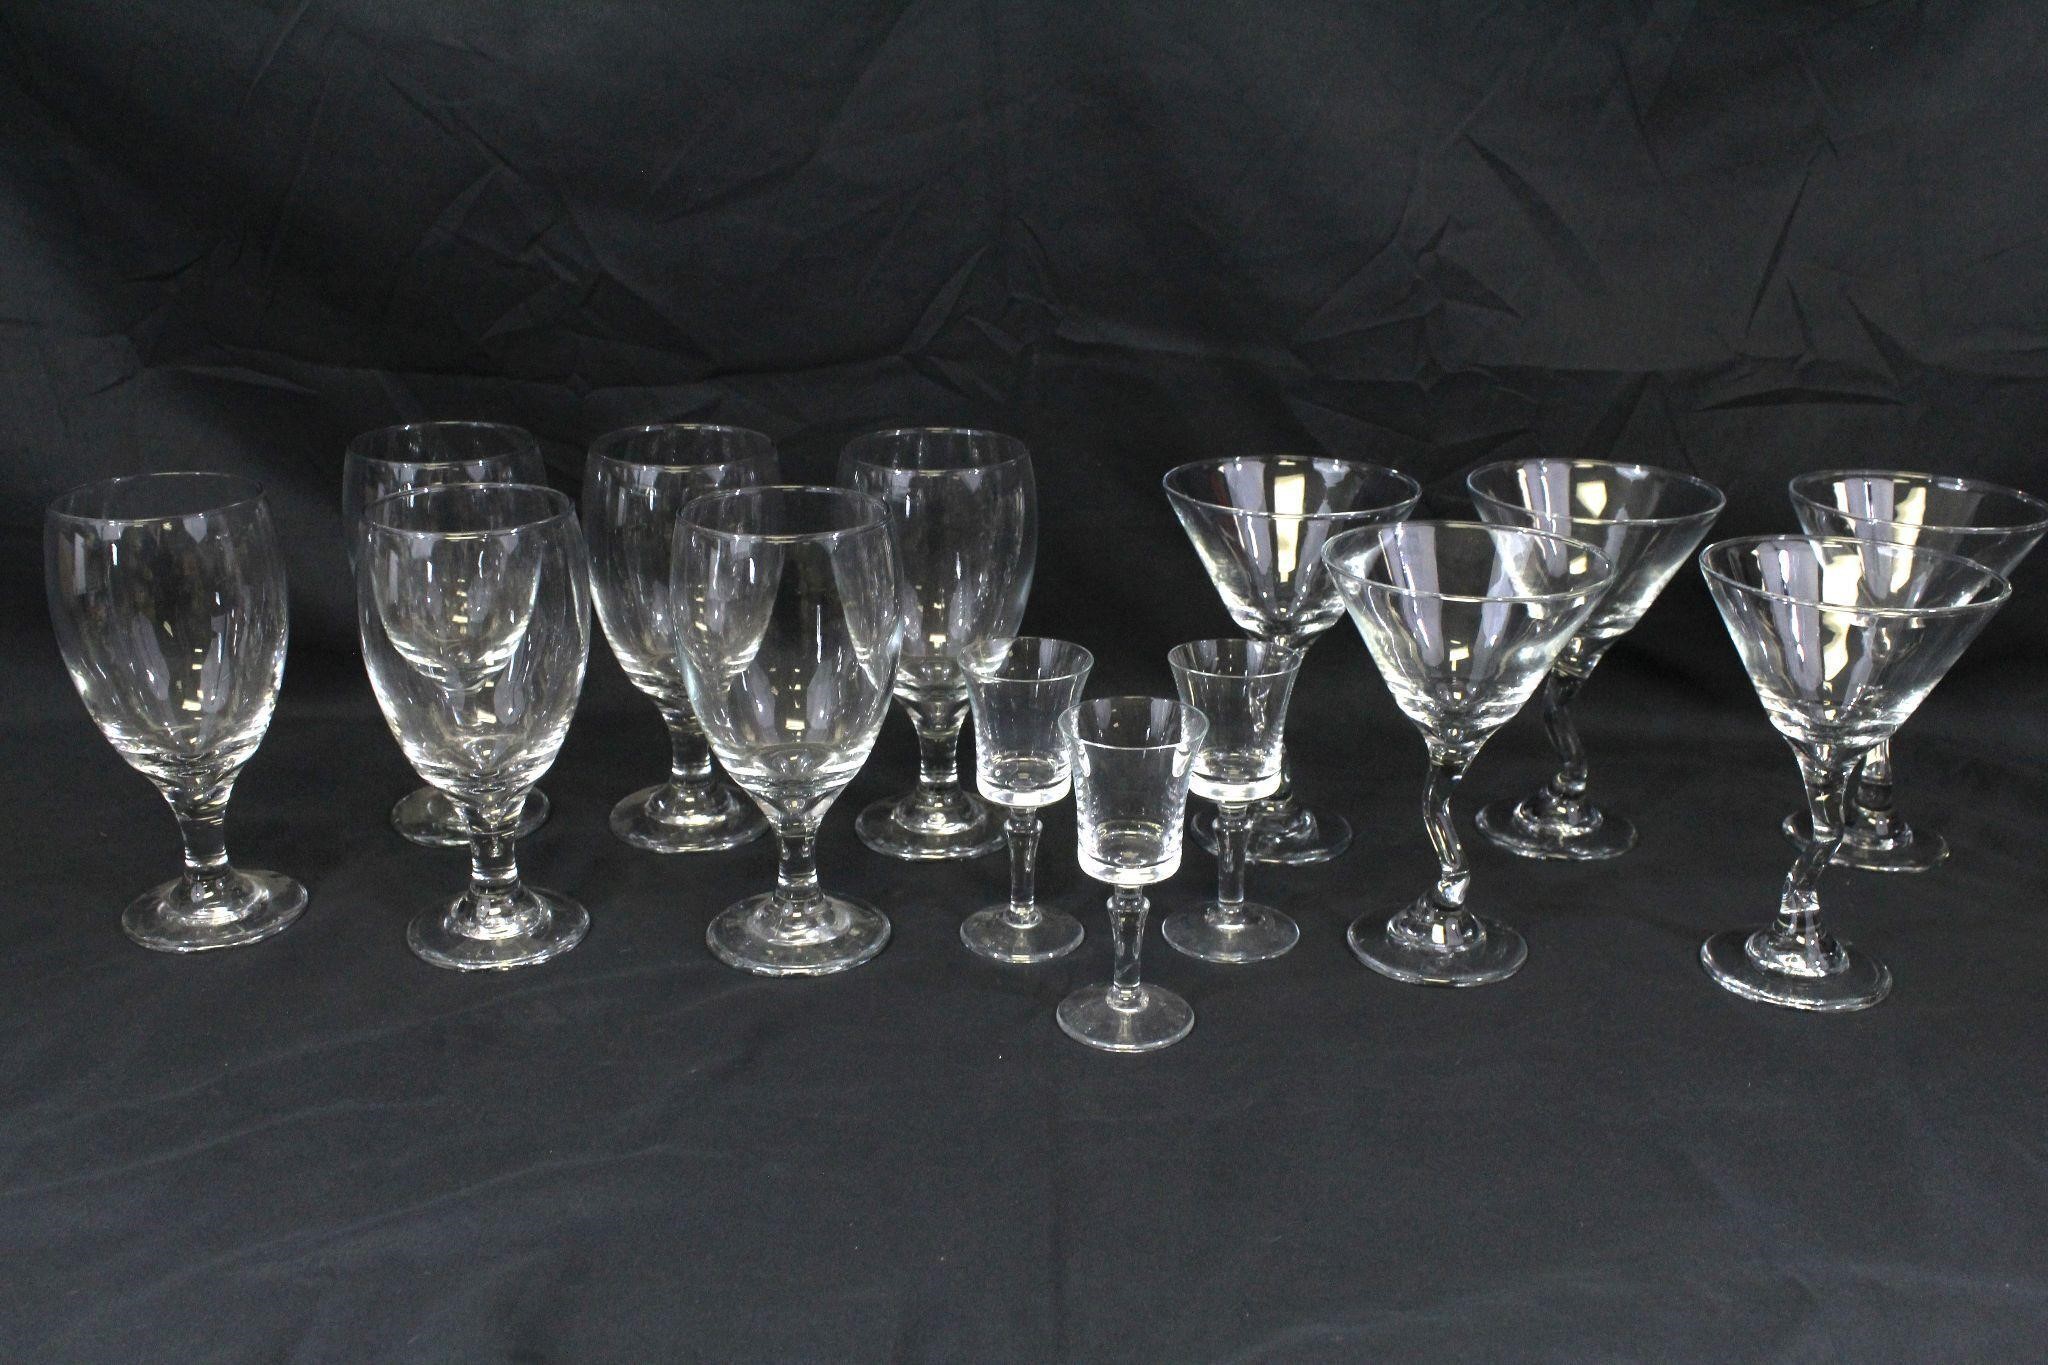 14 Clear "Wiggle" Martinis, Goblets & Cordials